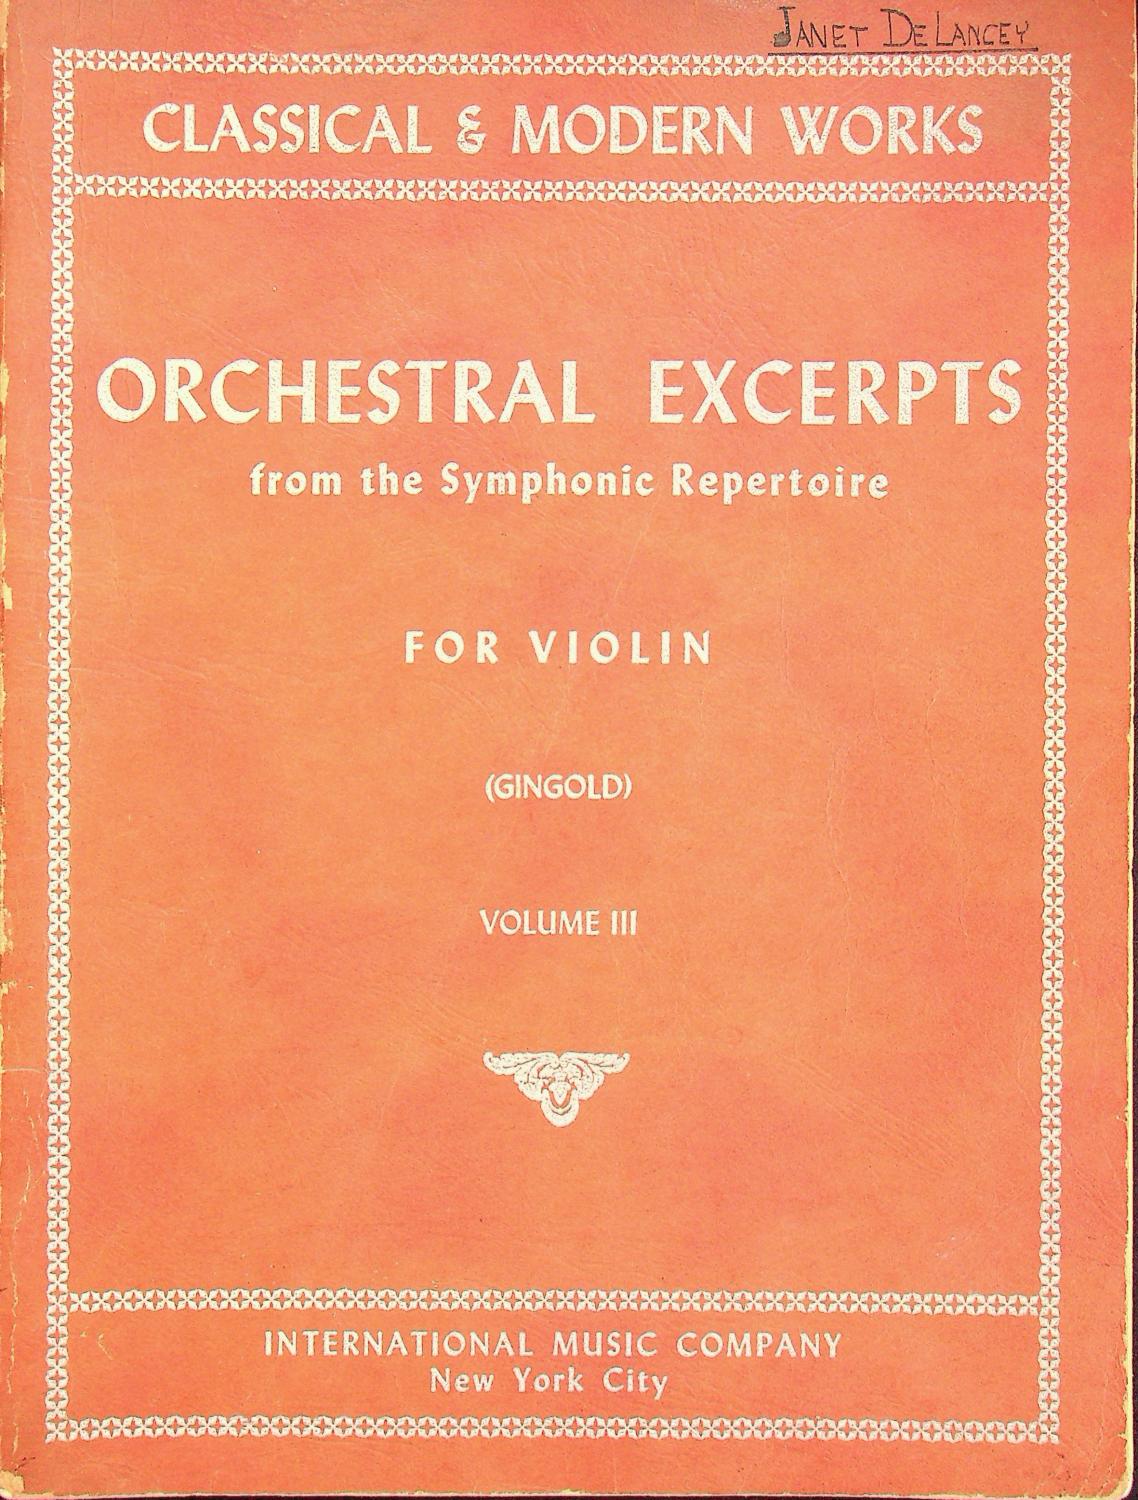 Orchestral Excerpts From the Symphonic Repertoire for Violin